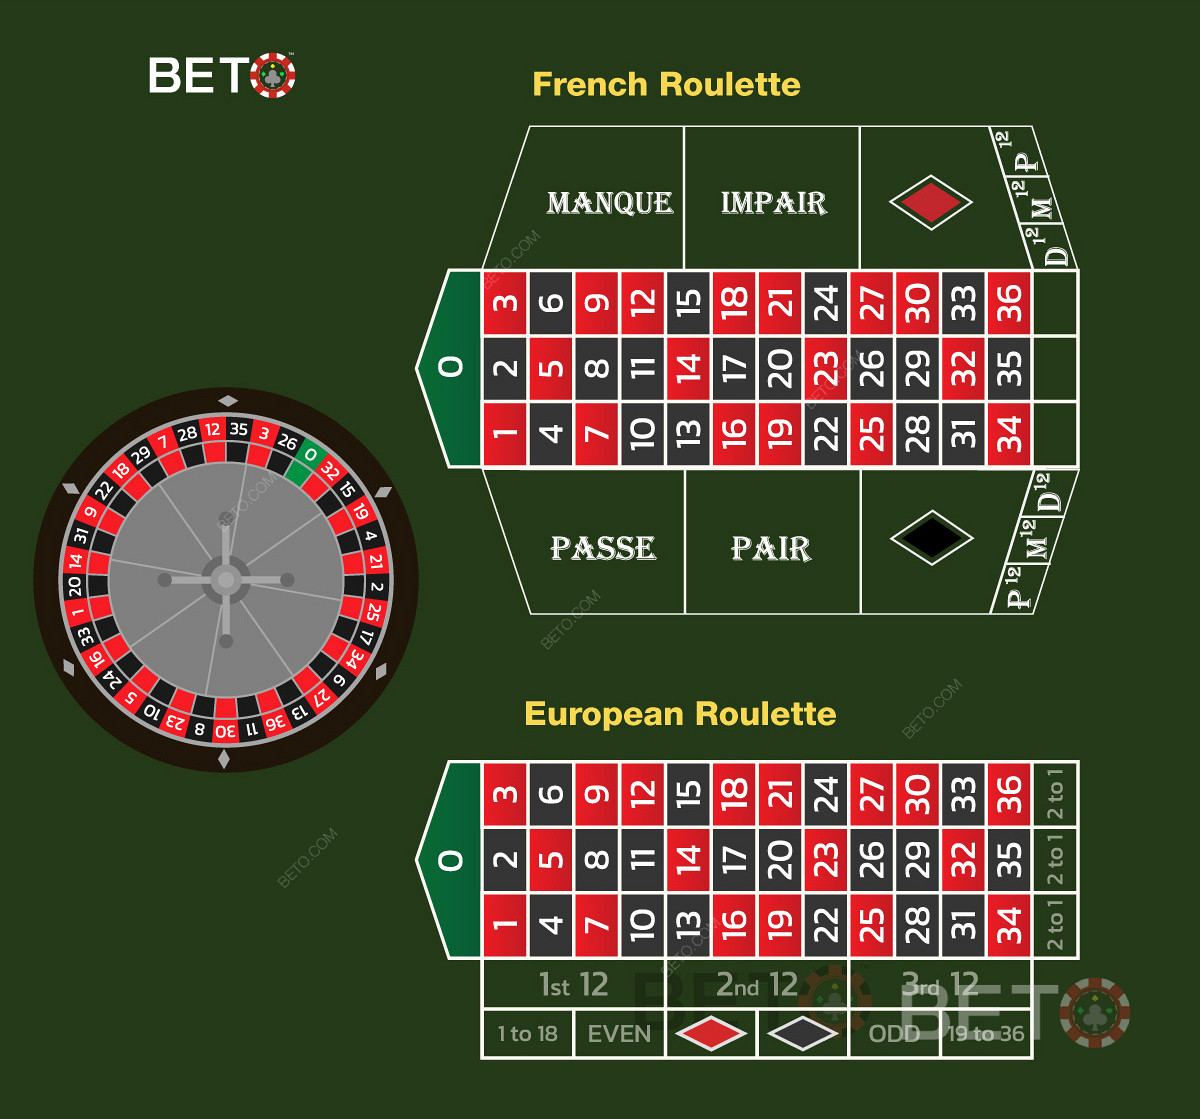 French Roulette compared to European Roulette